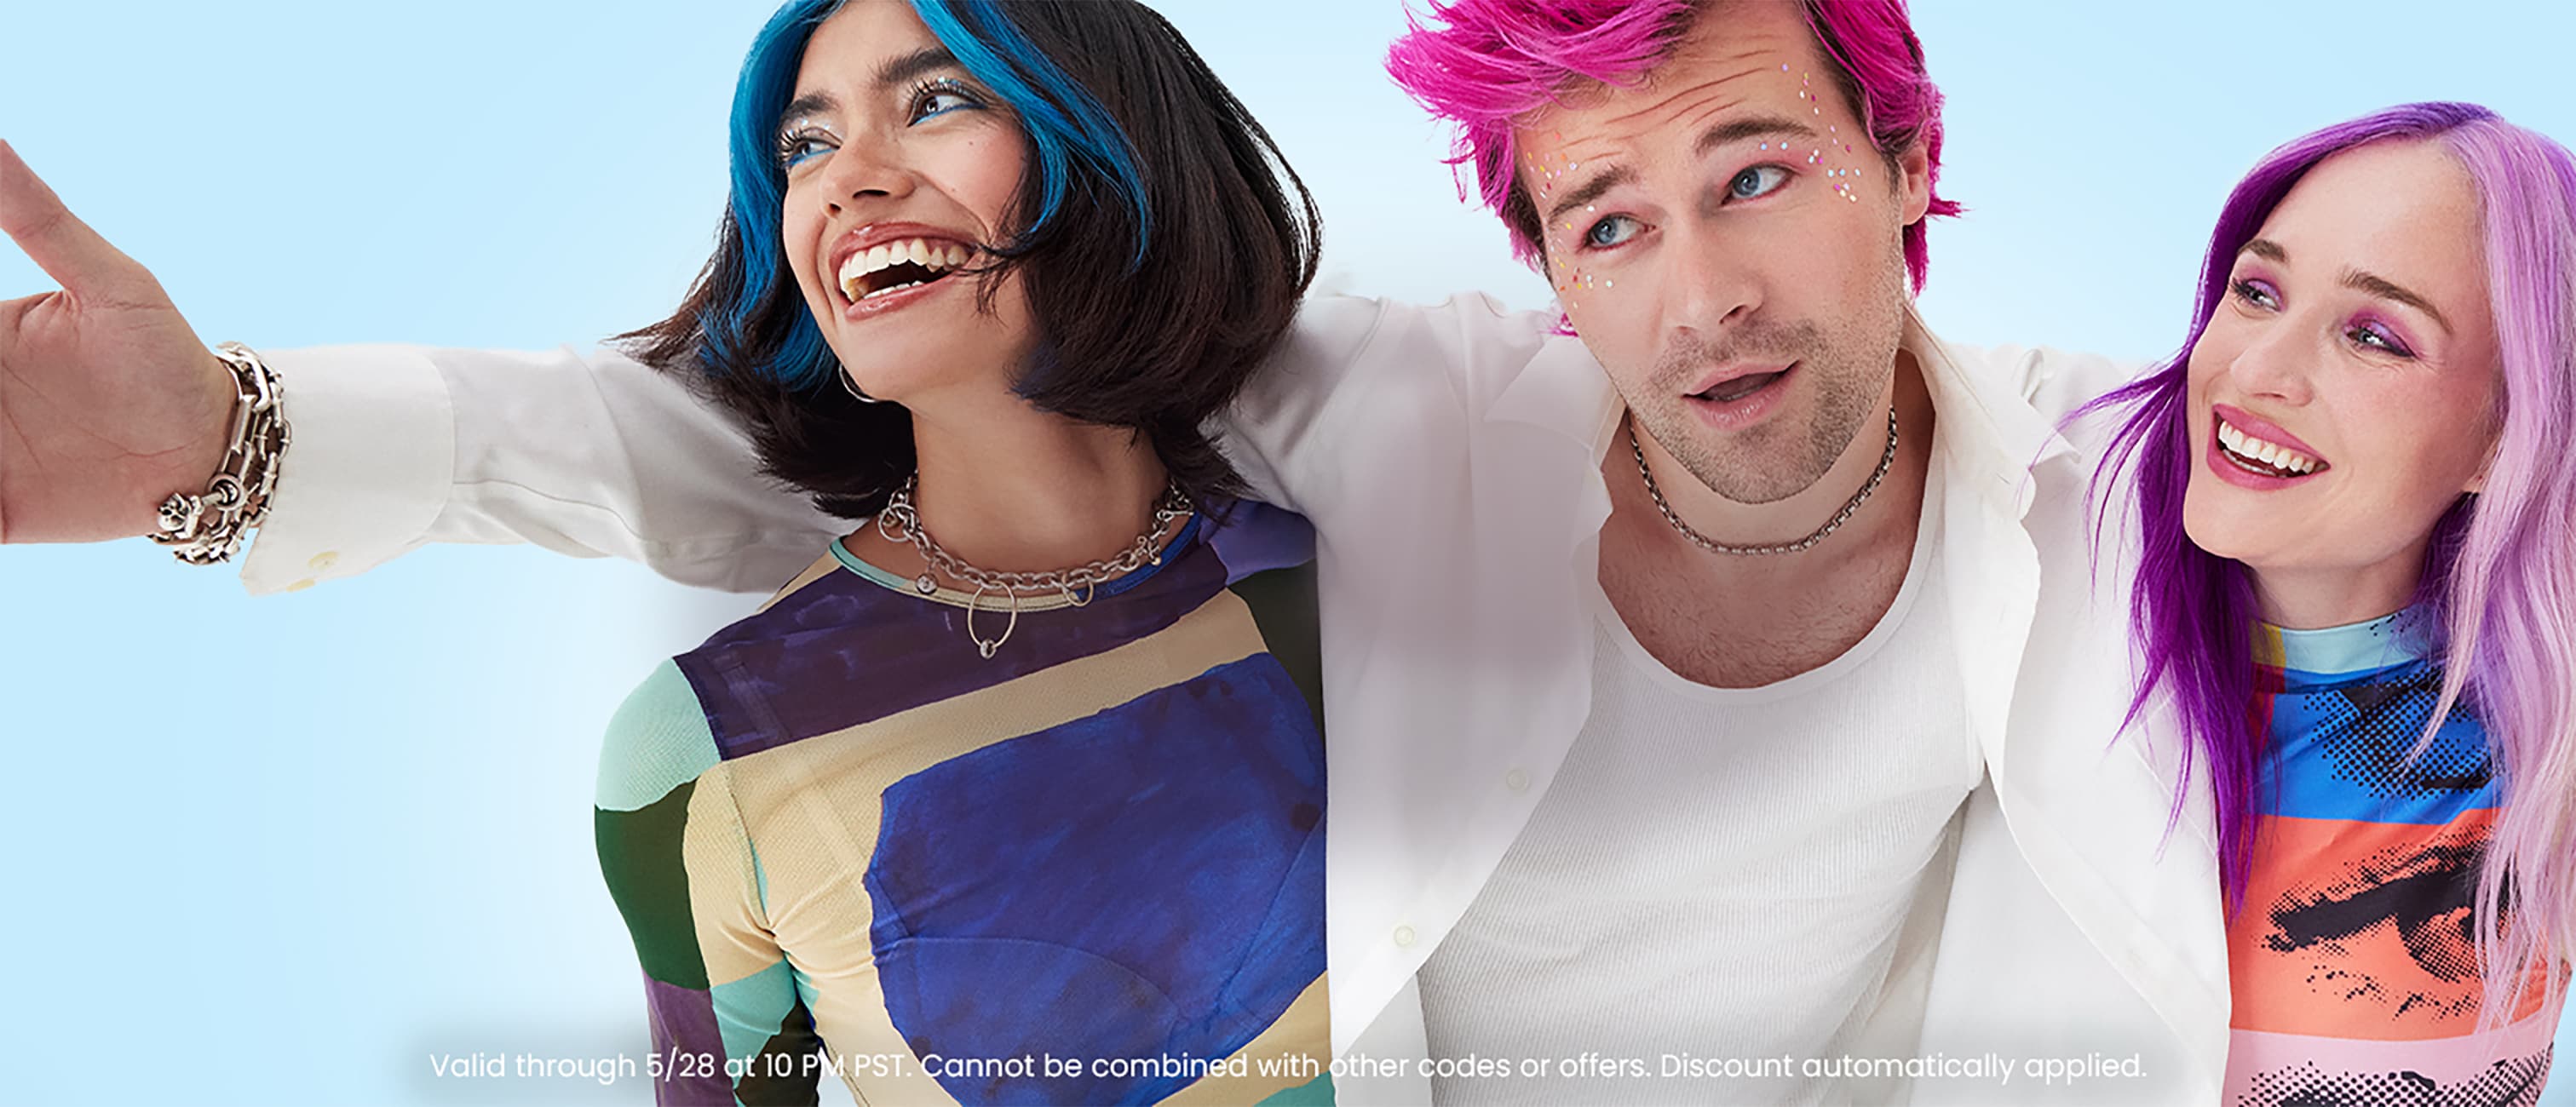 Joyful group showcasing Arctic Fox's vibrant hair colors: woman with Aquamarine highlights, man styled in Virgin Pink, and woman flaunting Girls Night—expressing unique, bold styles.